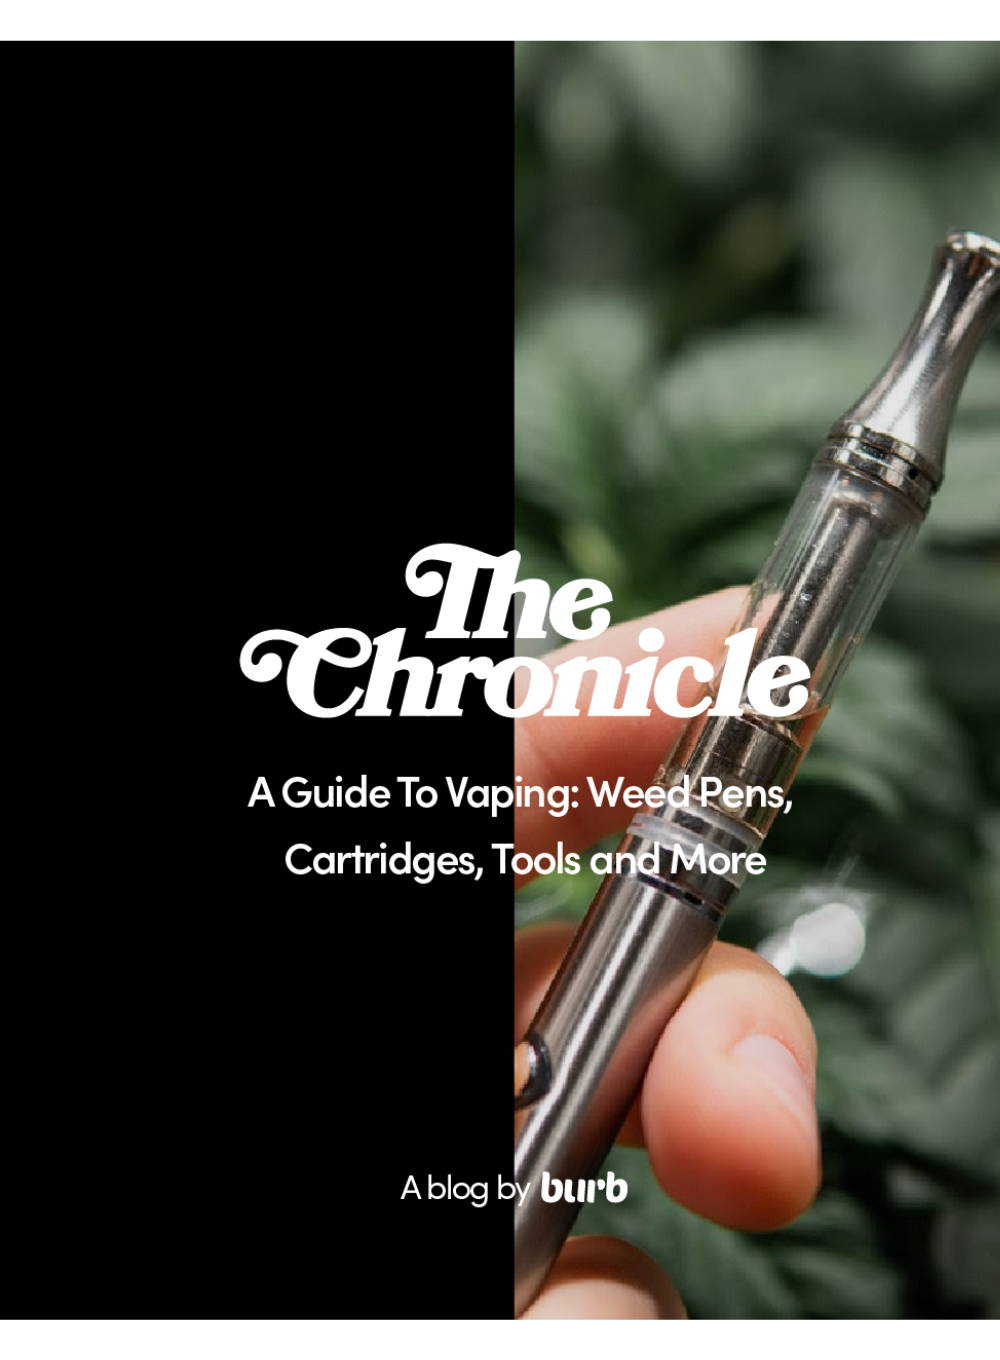 A Guide To Vaping: Weed Pens, Cartridges, Tools and More